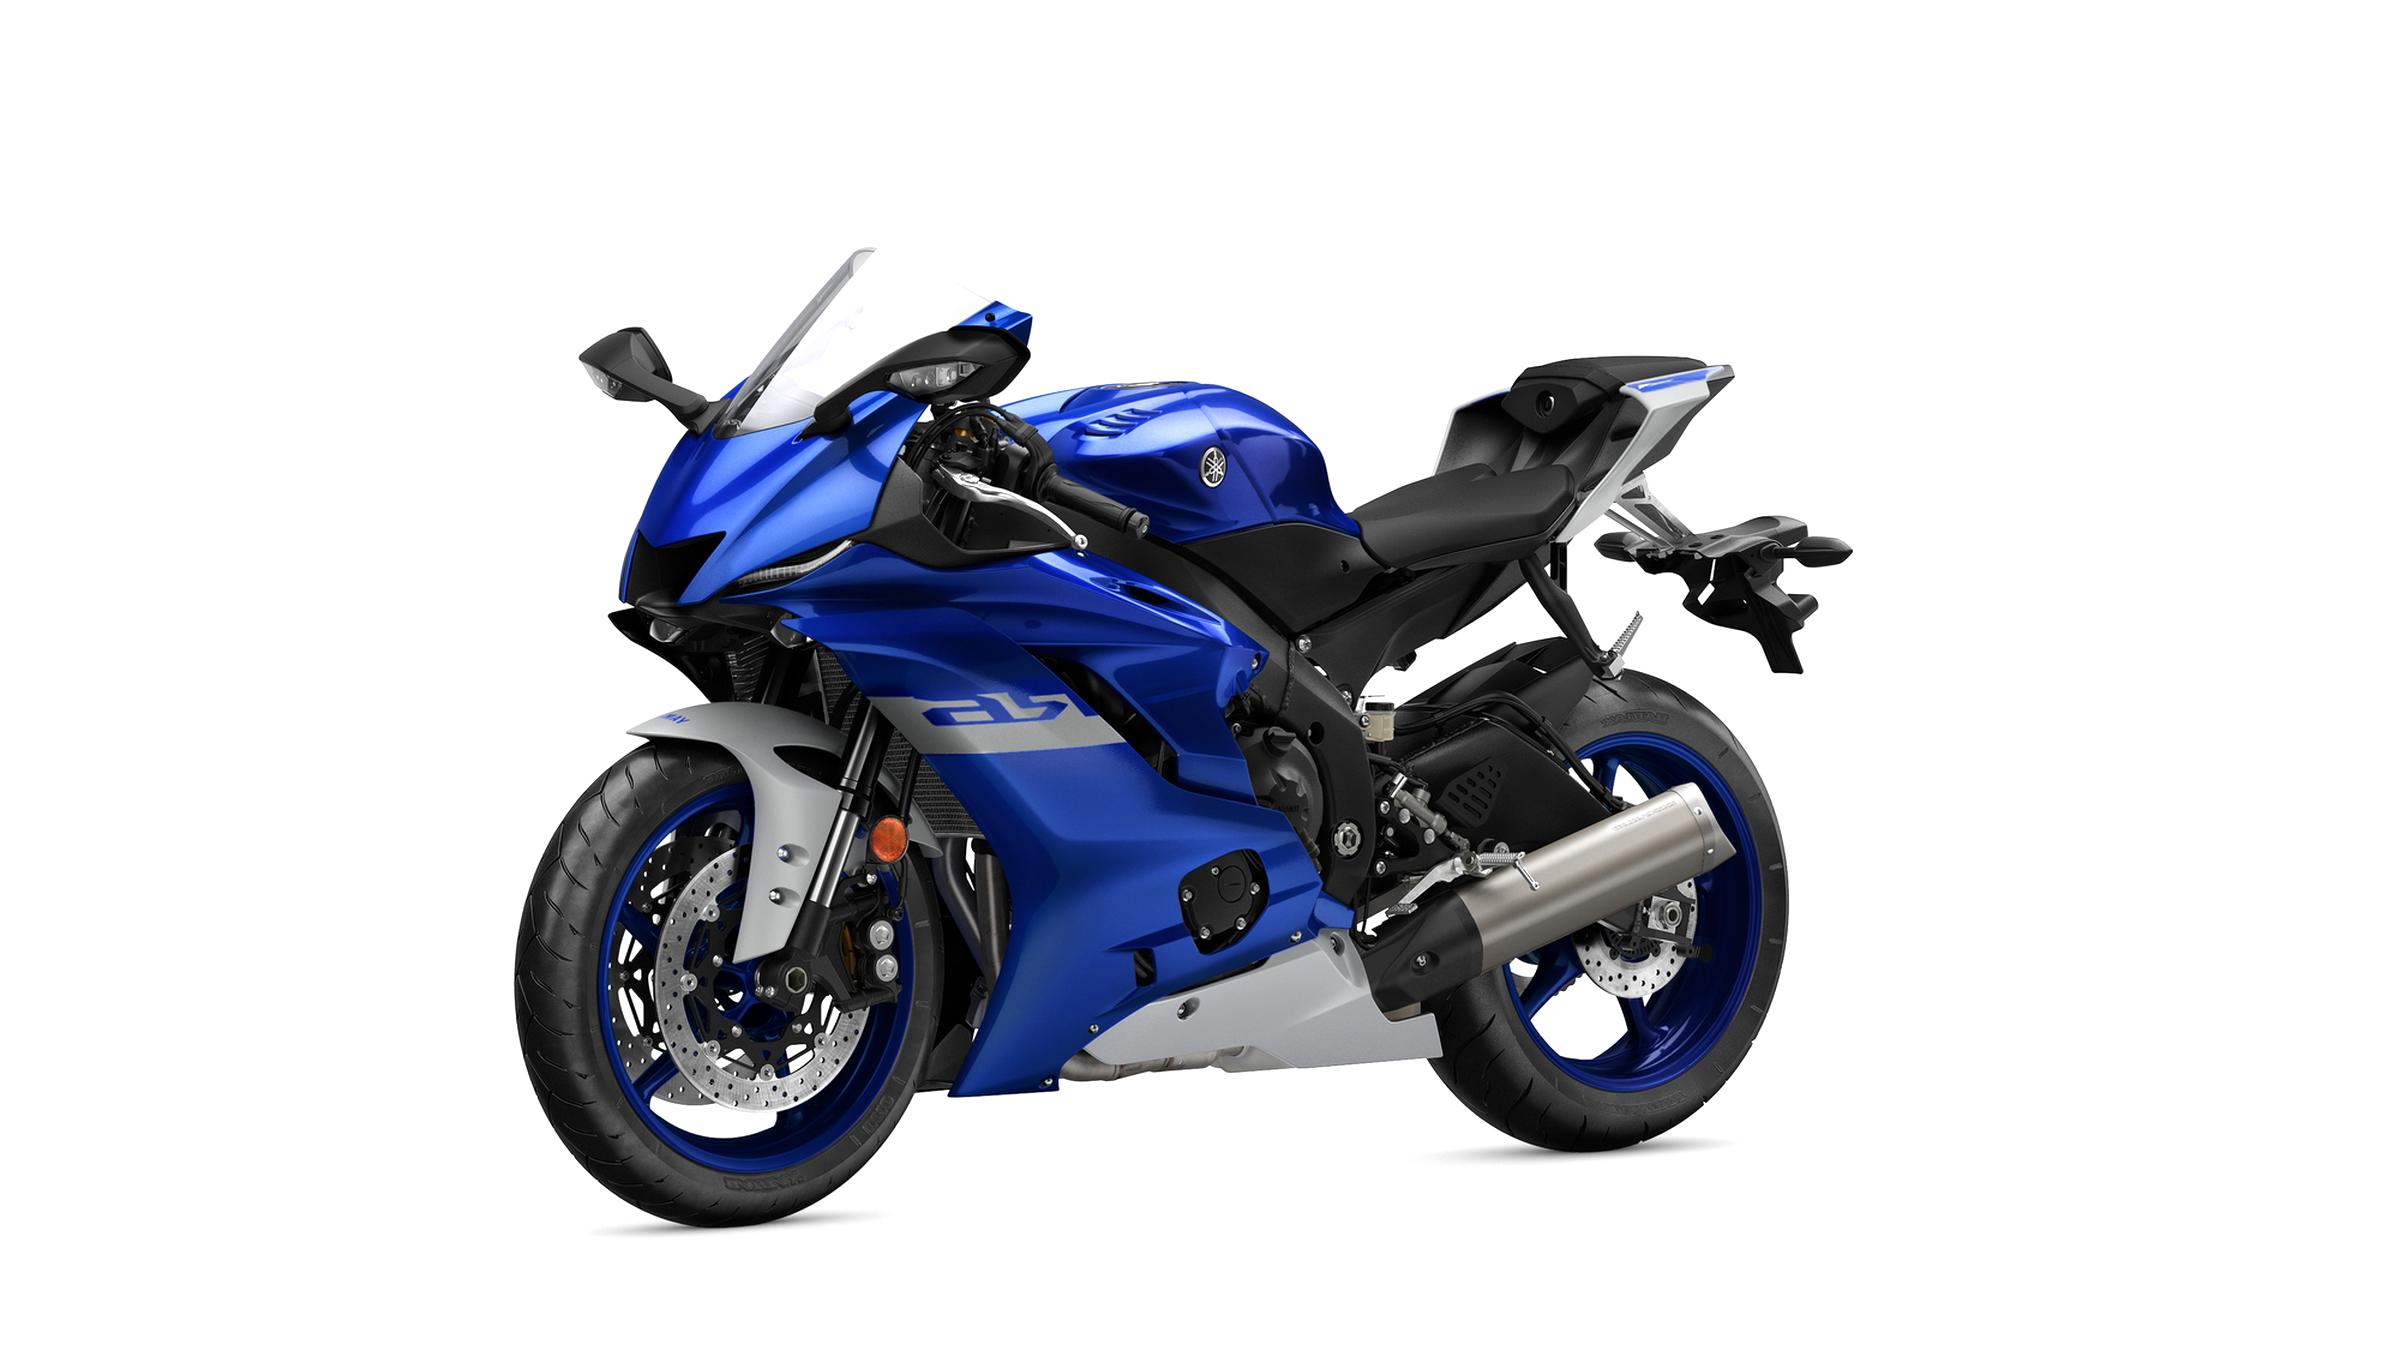 Yamaha R6 for sale in the UK